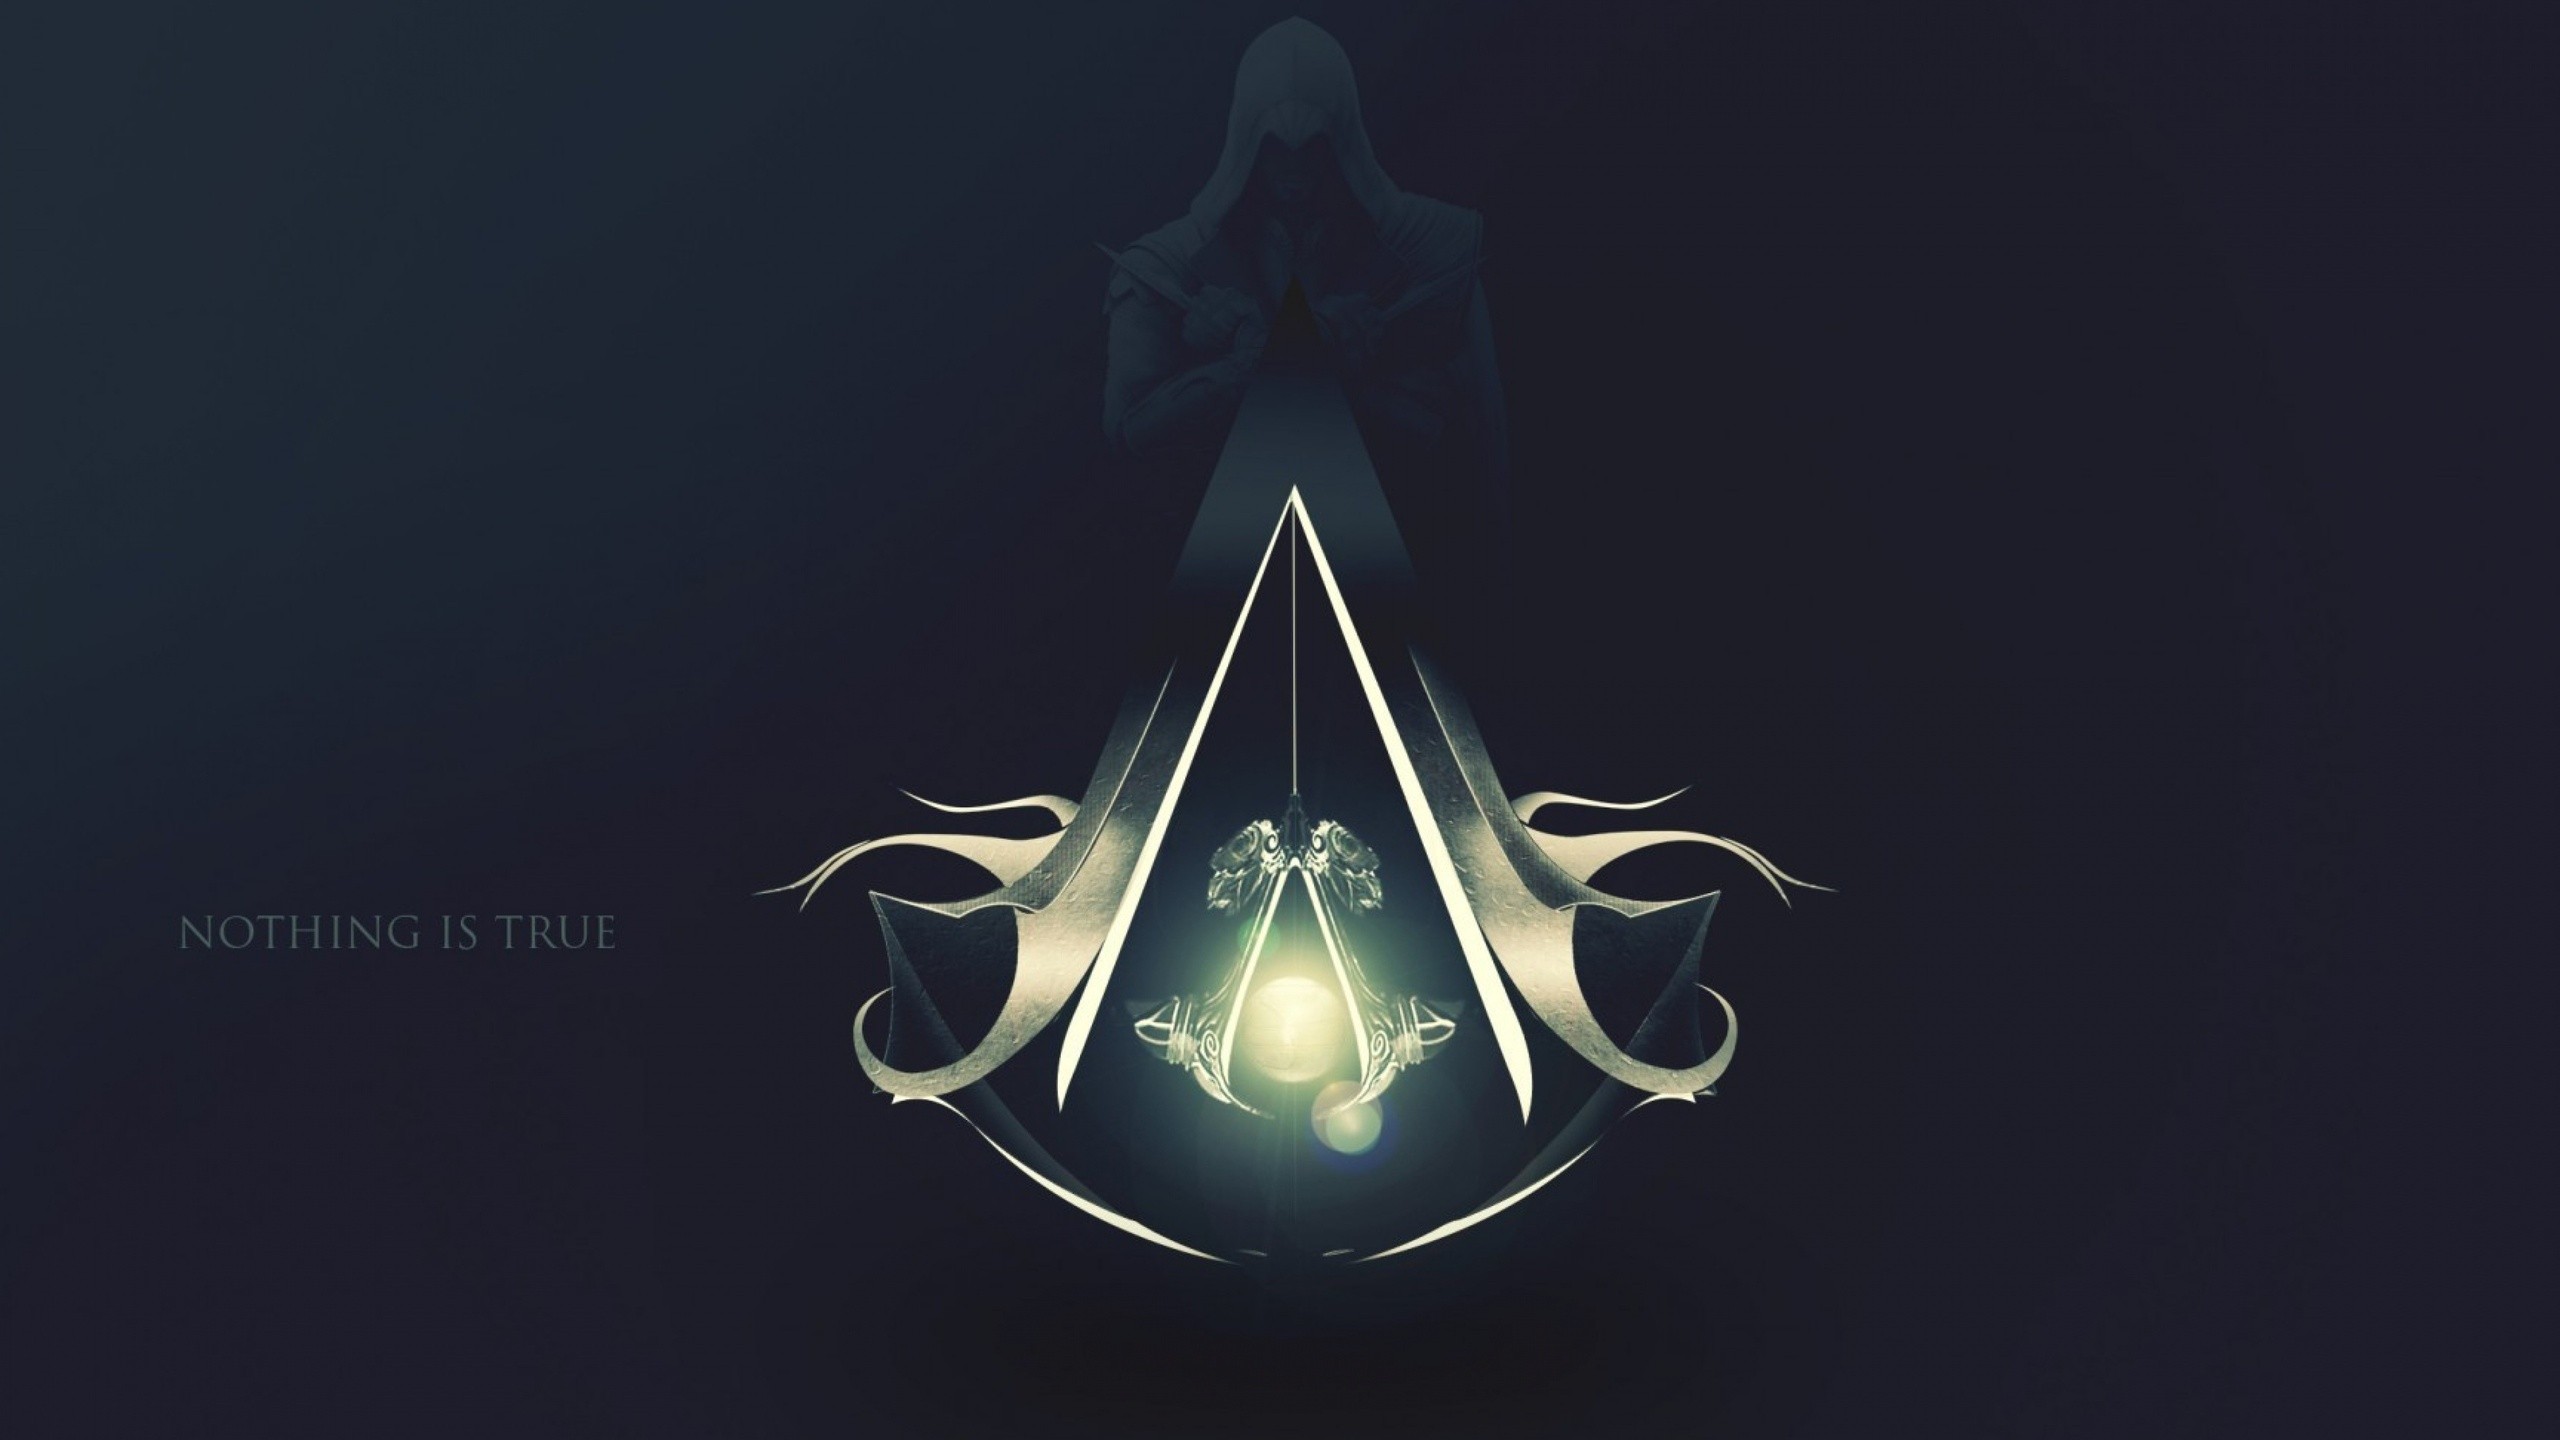 General 2560x1440 video games Assassin's Creed video game art